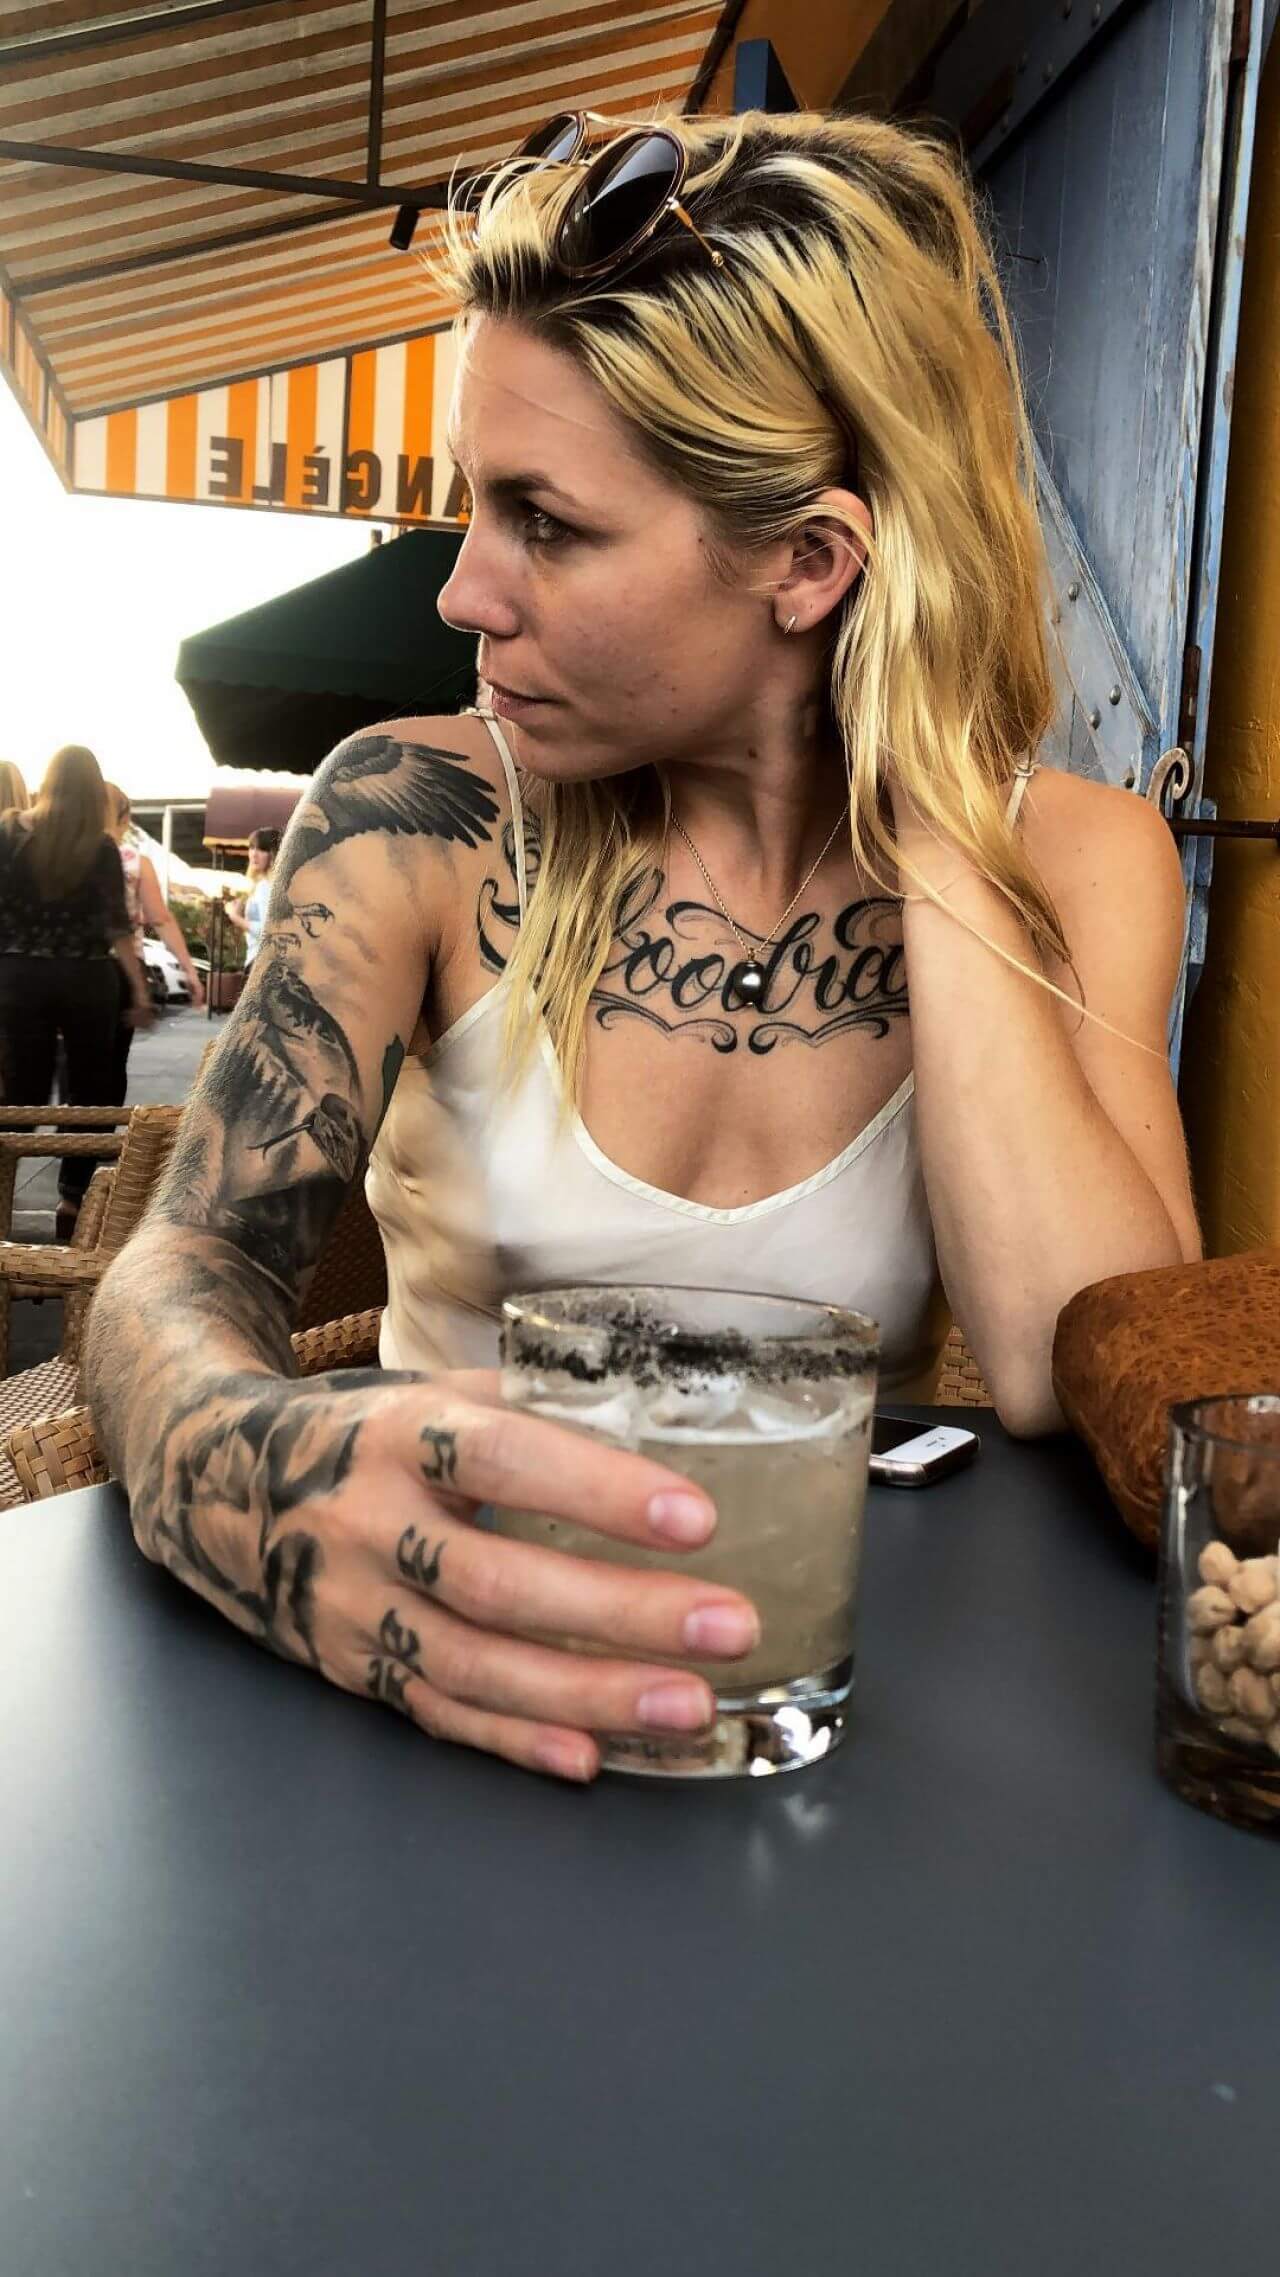 skylar grey awesome pictures 2